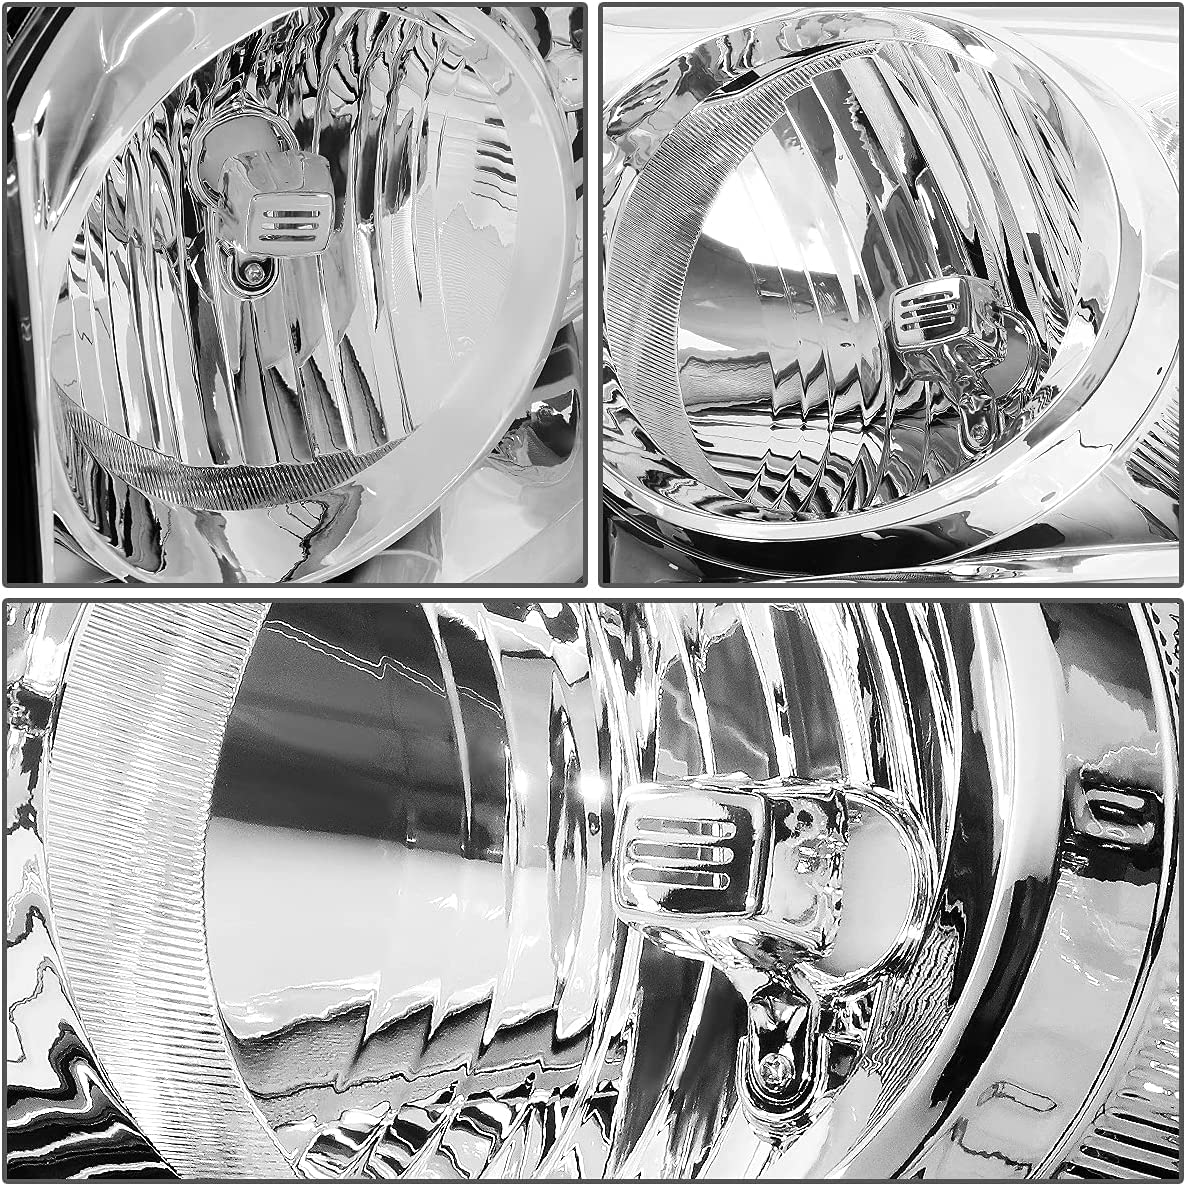 Auto Dynasty Factory Style Headlights Compatible with 06-09 Dodge Ram 1500 2500 3500 - Driver and Passenger Side - Clear Lens with Chrome Housing